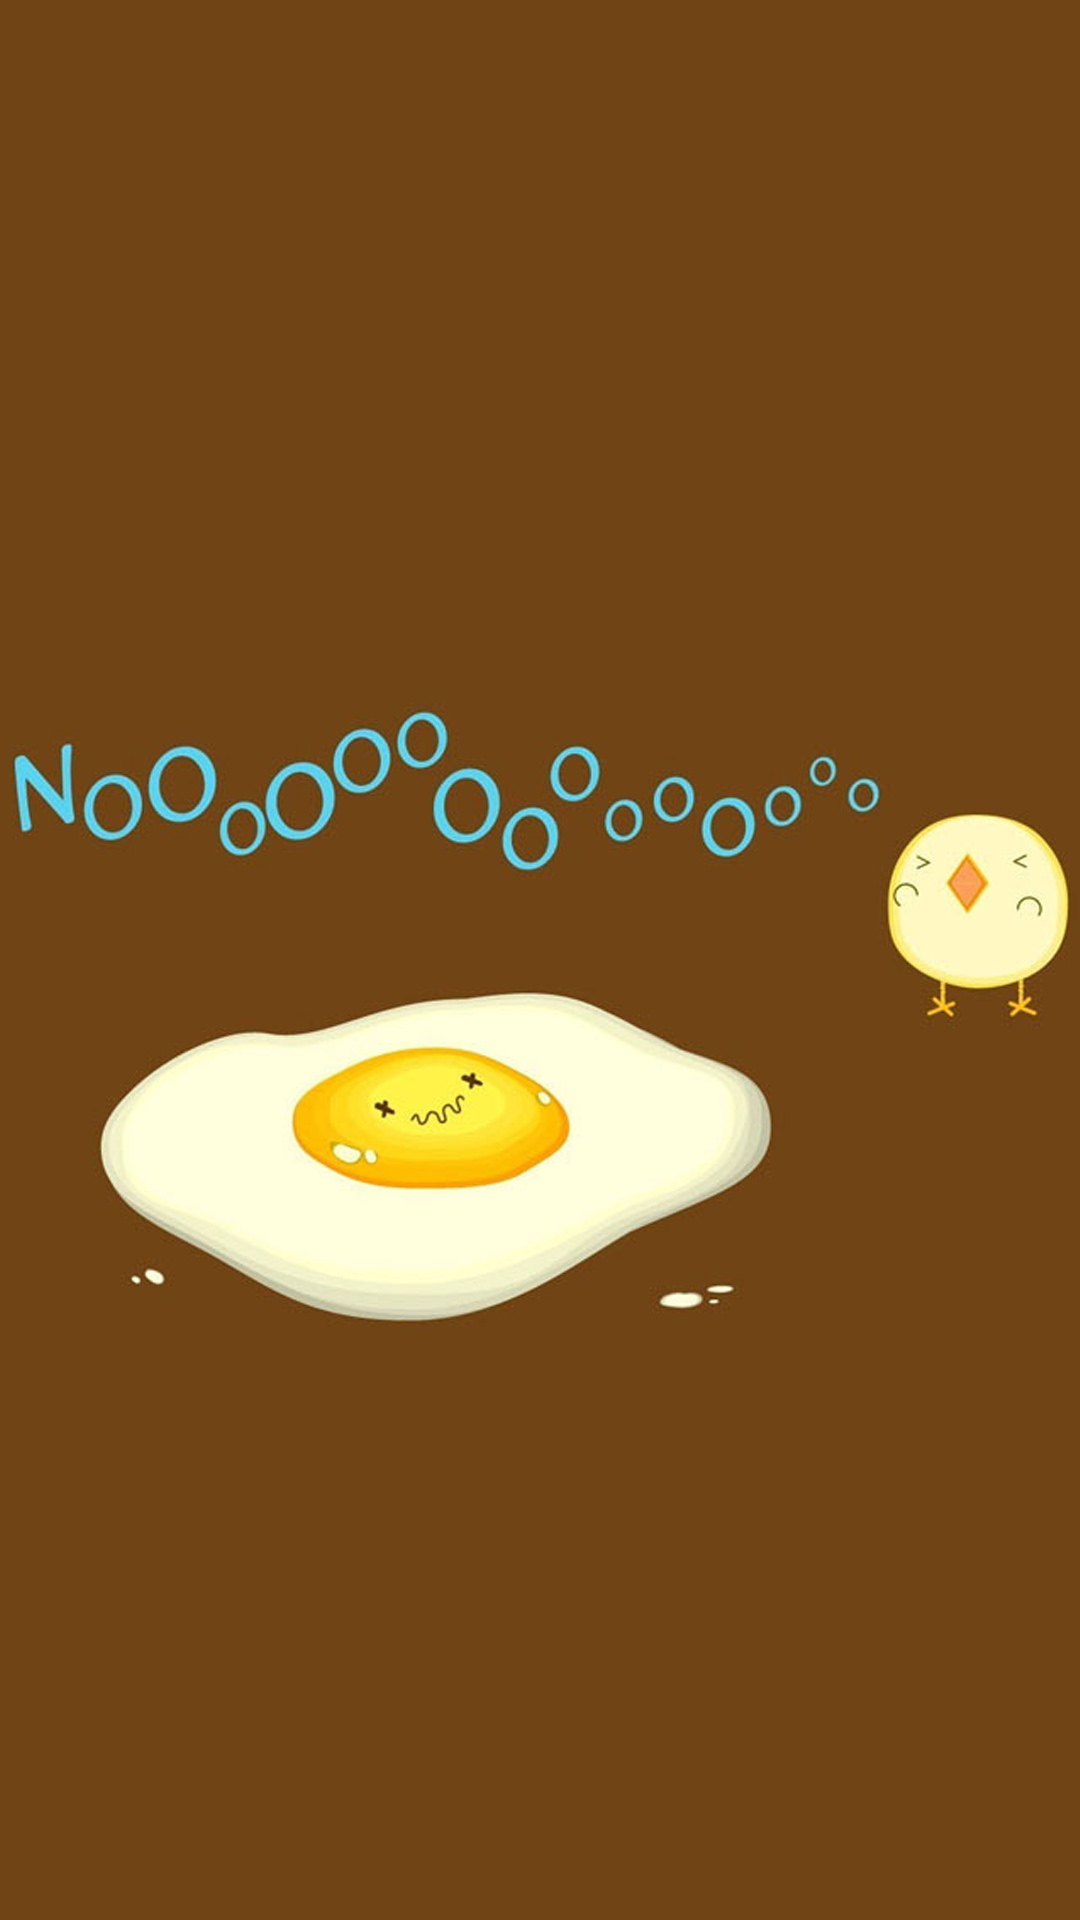 Funny Egg No Android Wallpaper free download